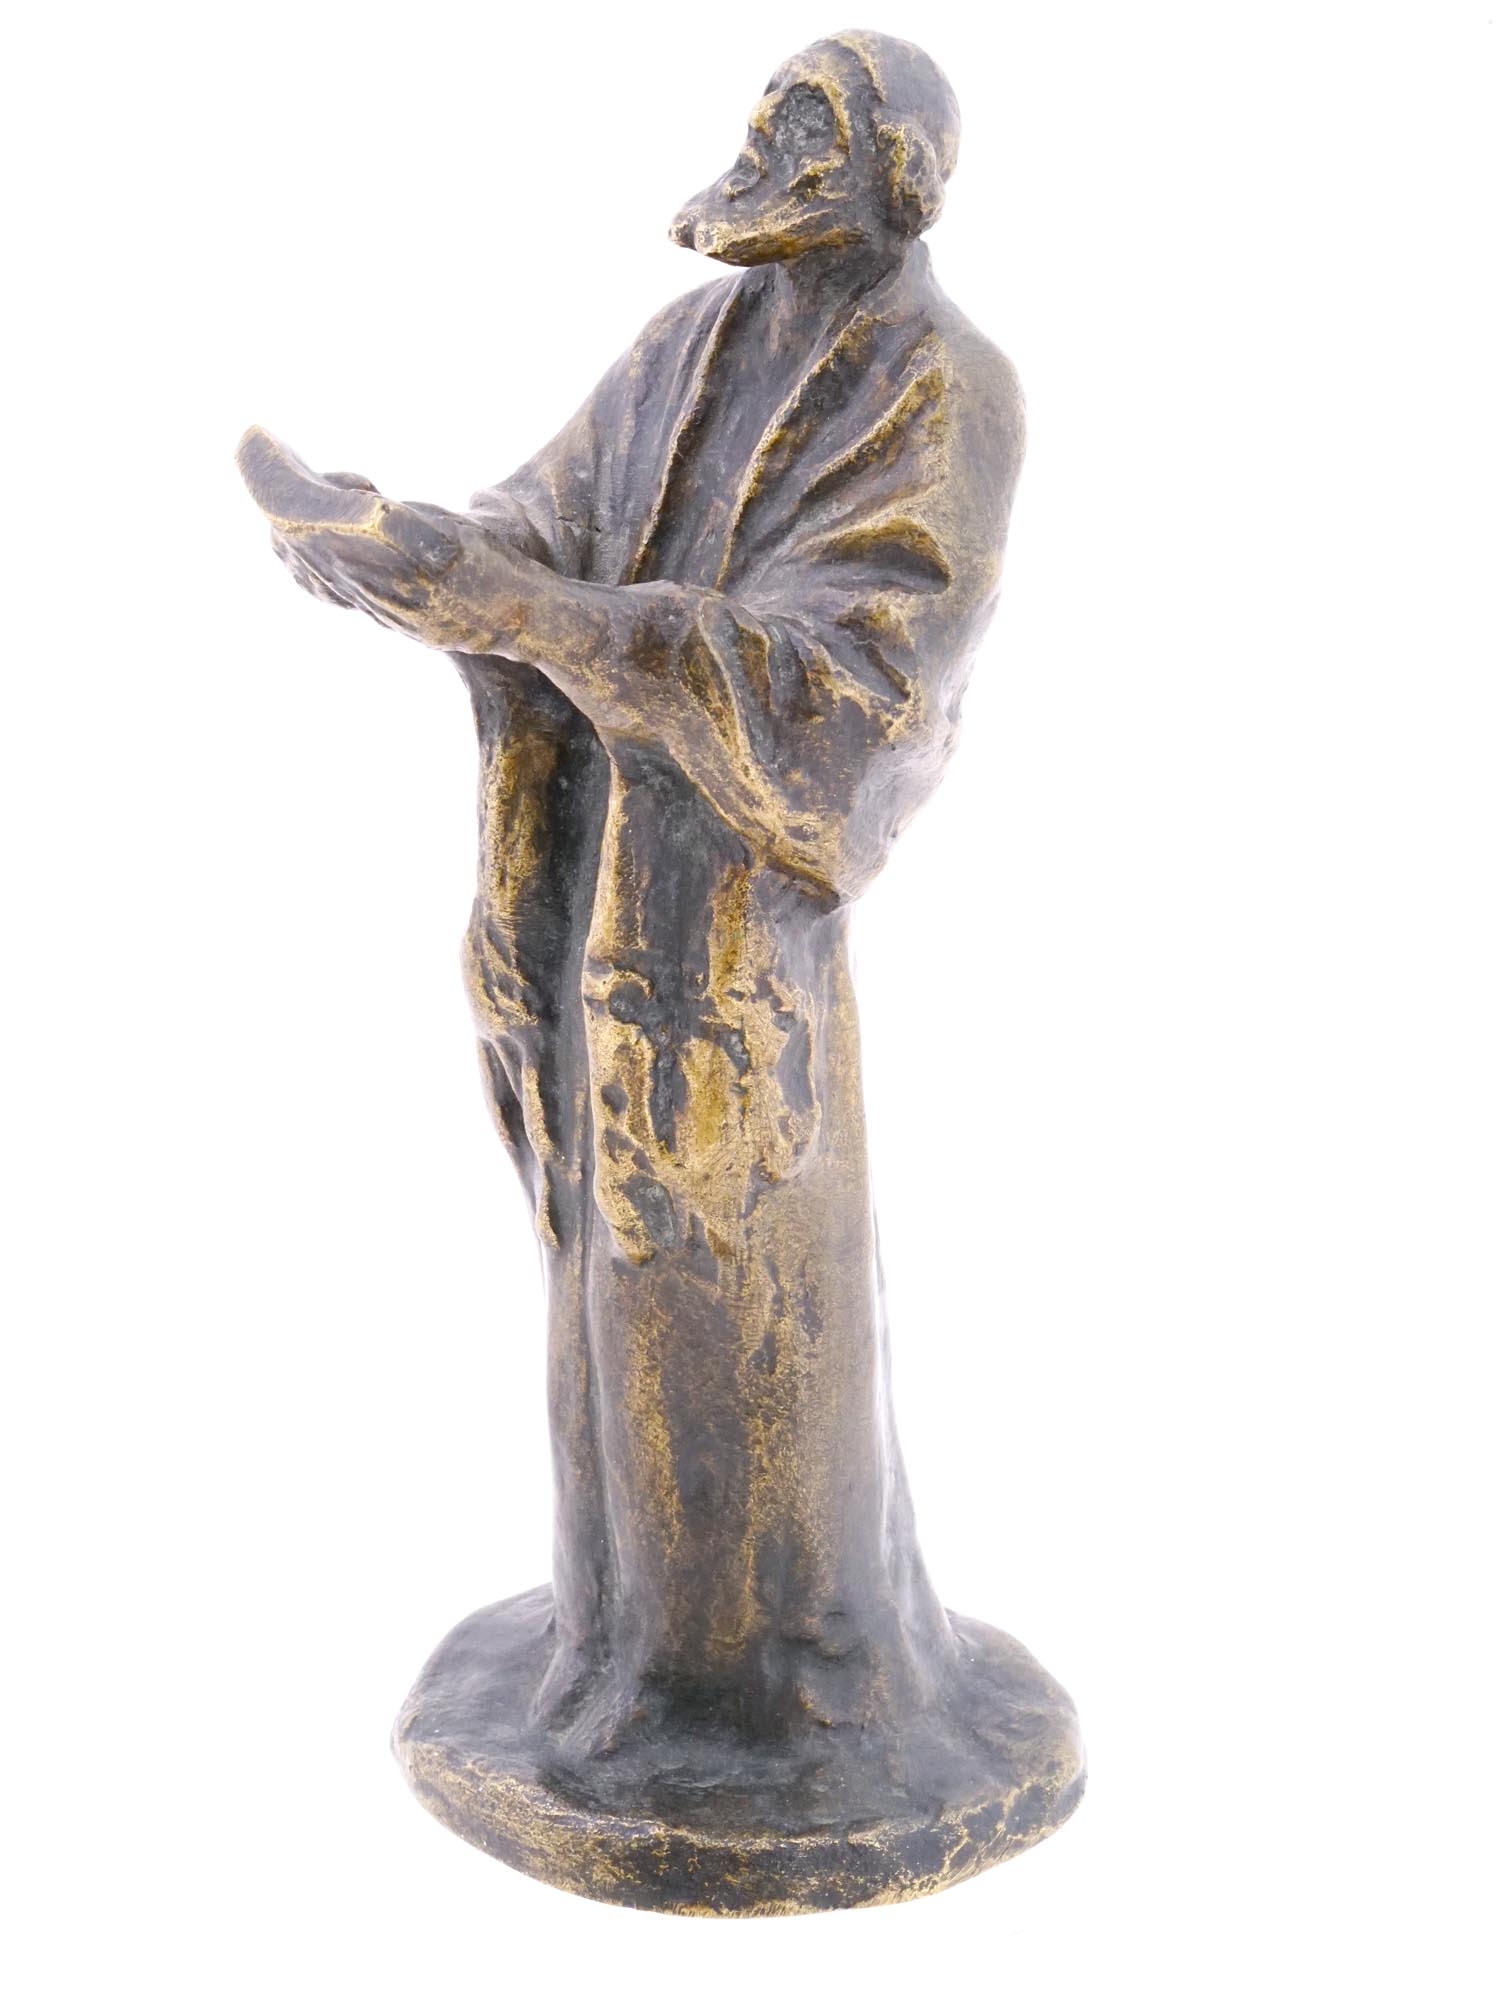 JUDAICA FRENCH BRONZE SCULPTURE BY ALPHONSE LEVY PIC-0